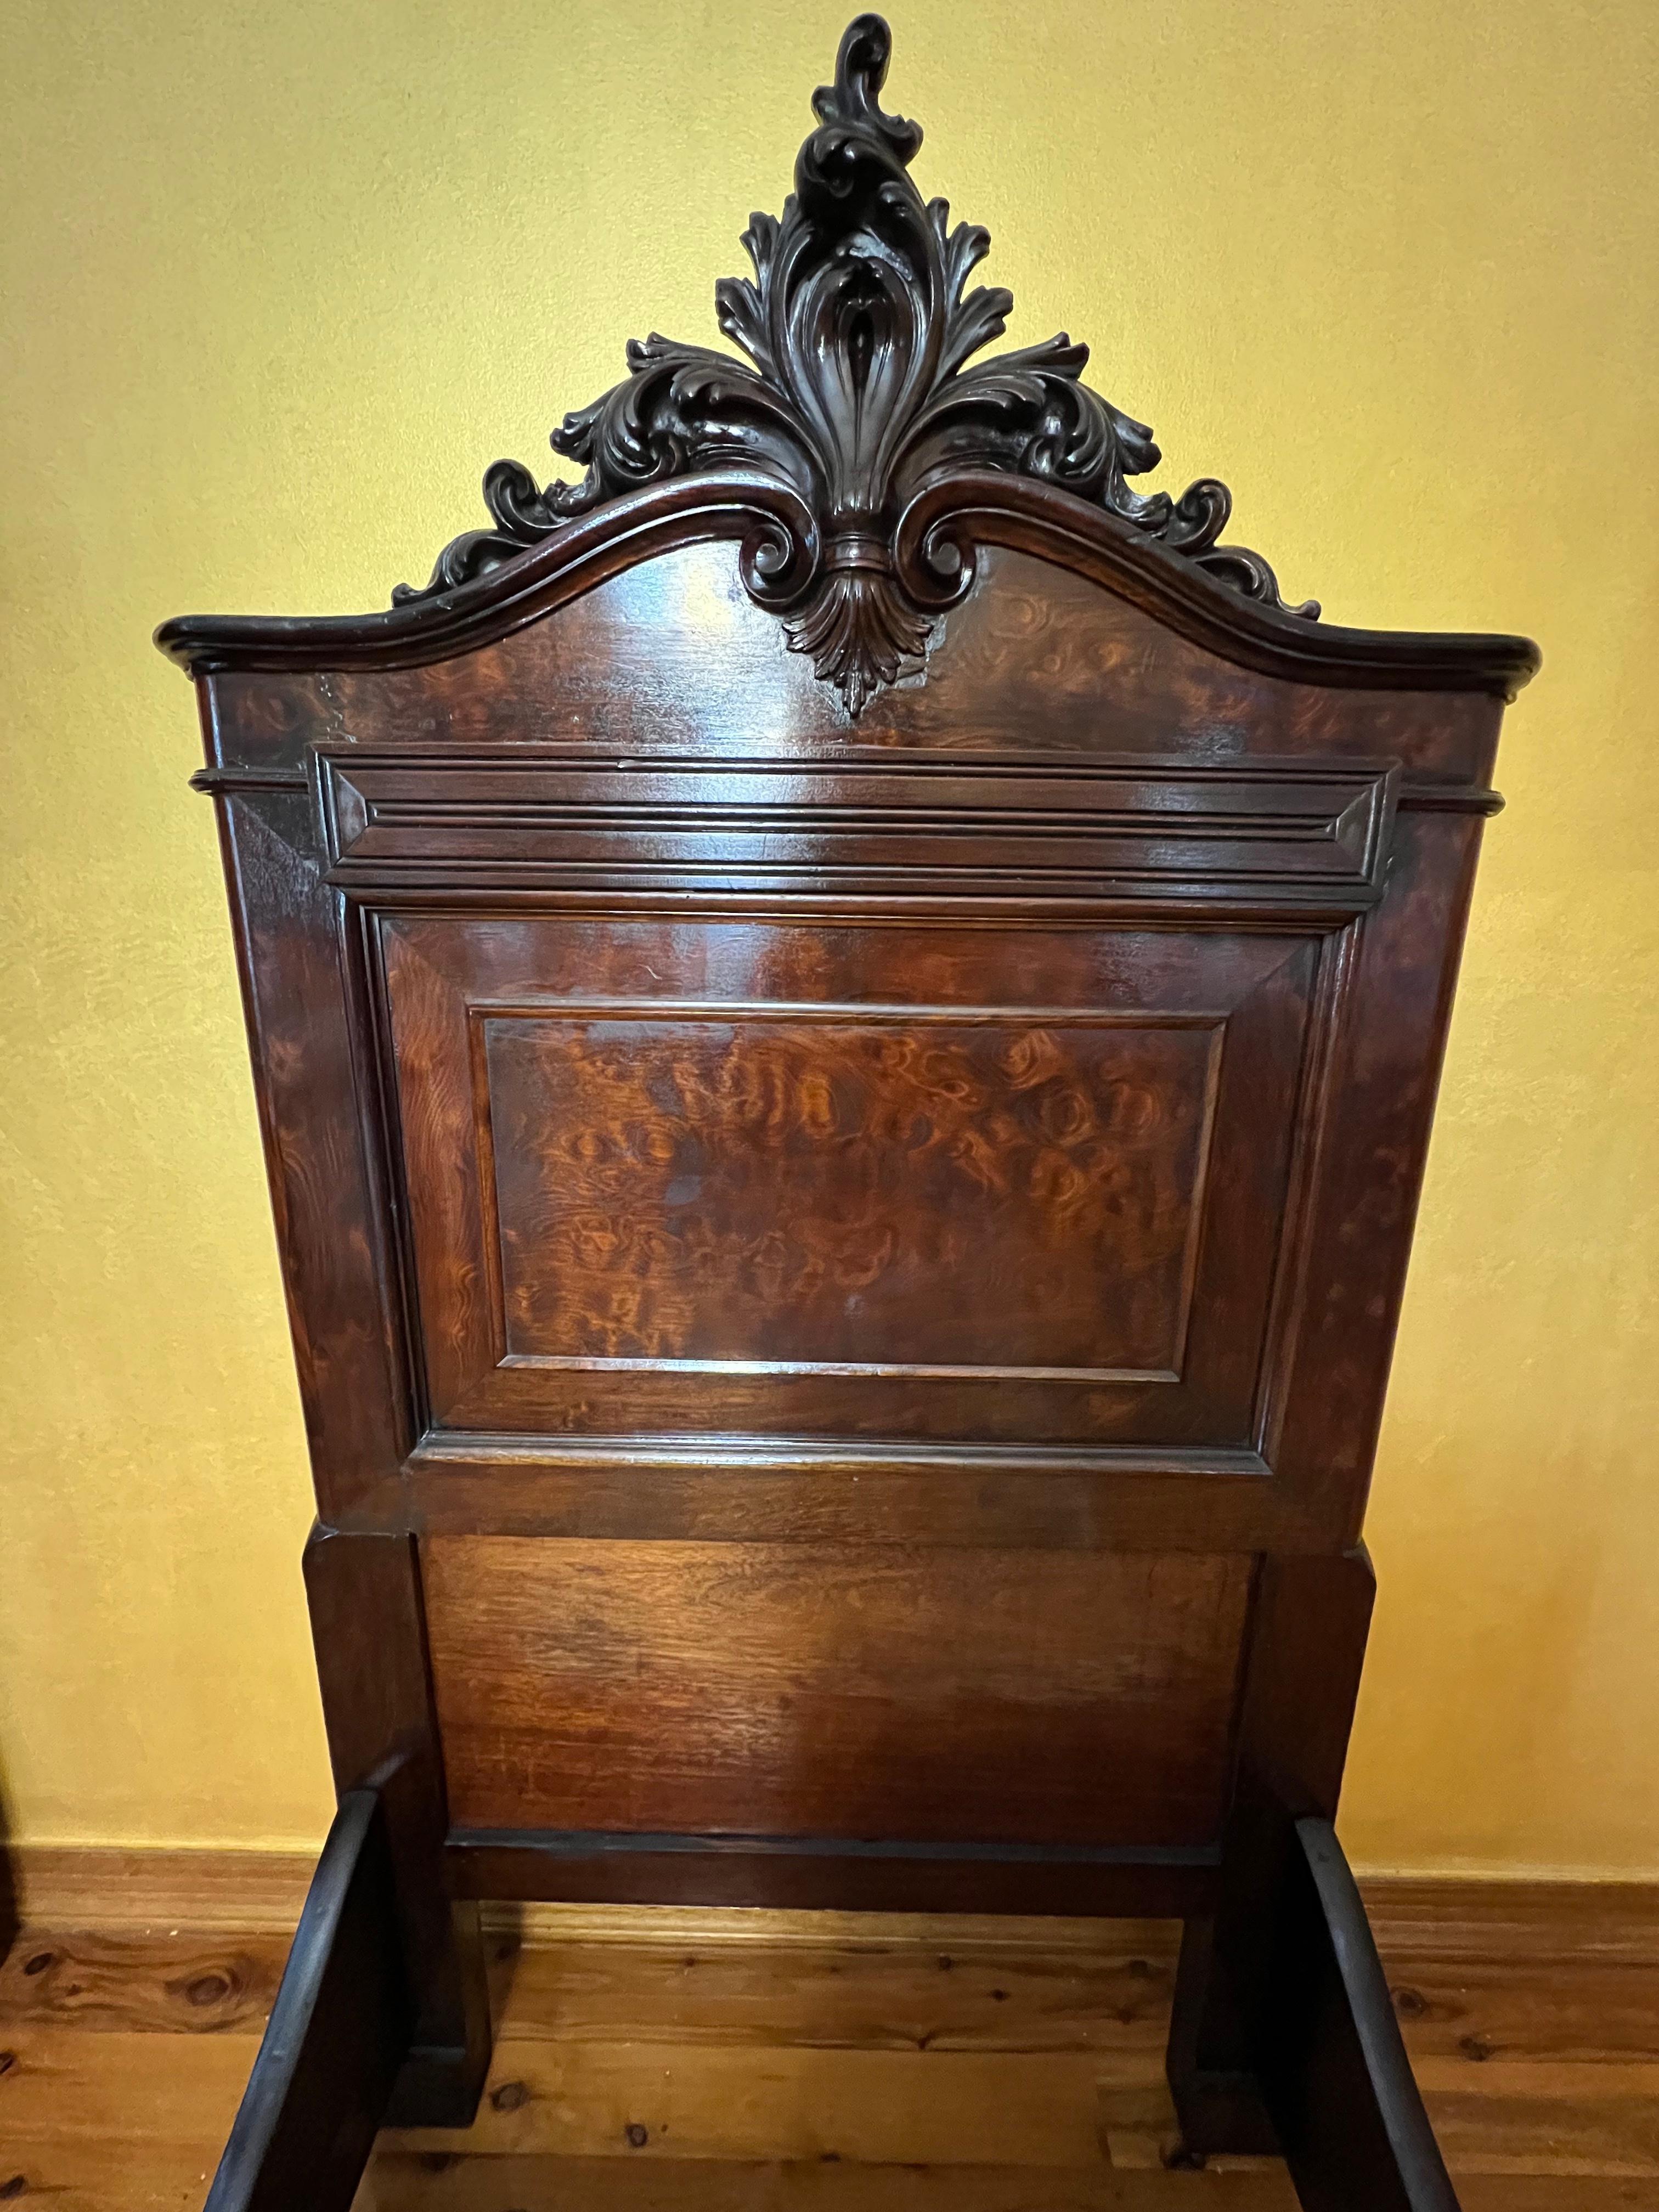 Centre detail carving detail, burl walnut detail throughout, comes with slats, some wear too frame due to age and use.

Size: Single Bed

Circa: 19th century

Material: Walnut

Country of Origin: France

Measurements

Headboard: 169cm